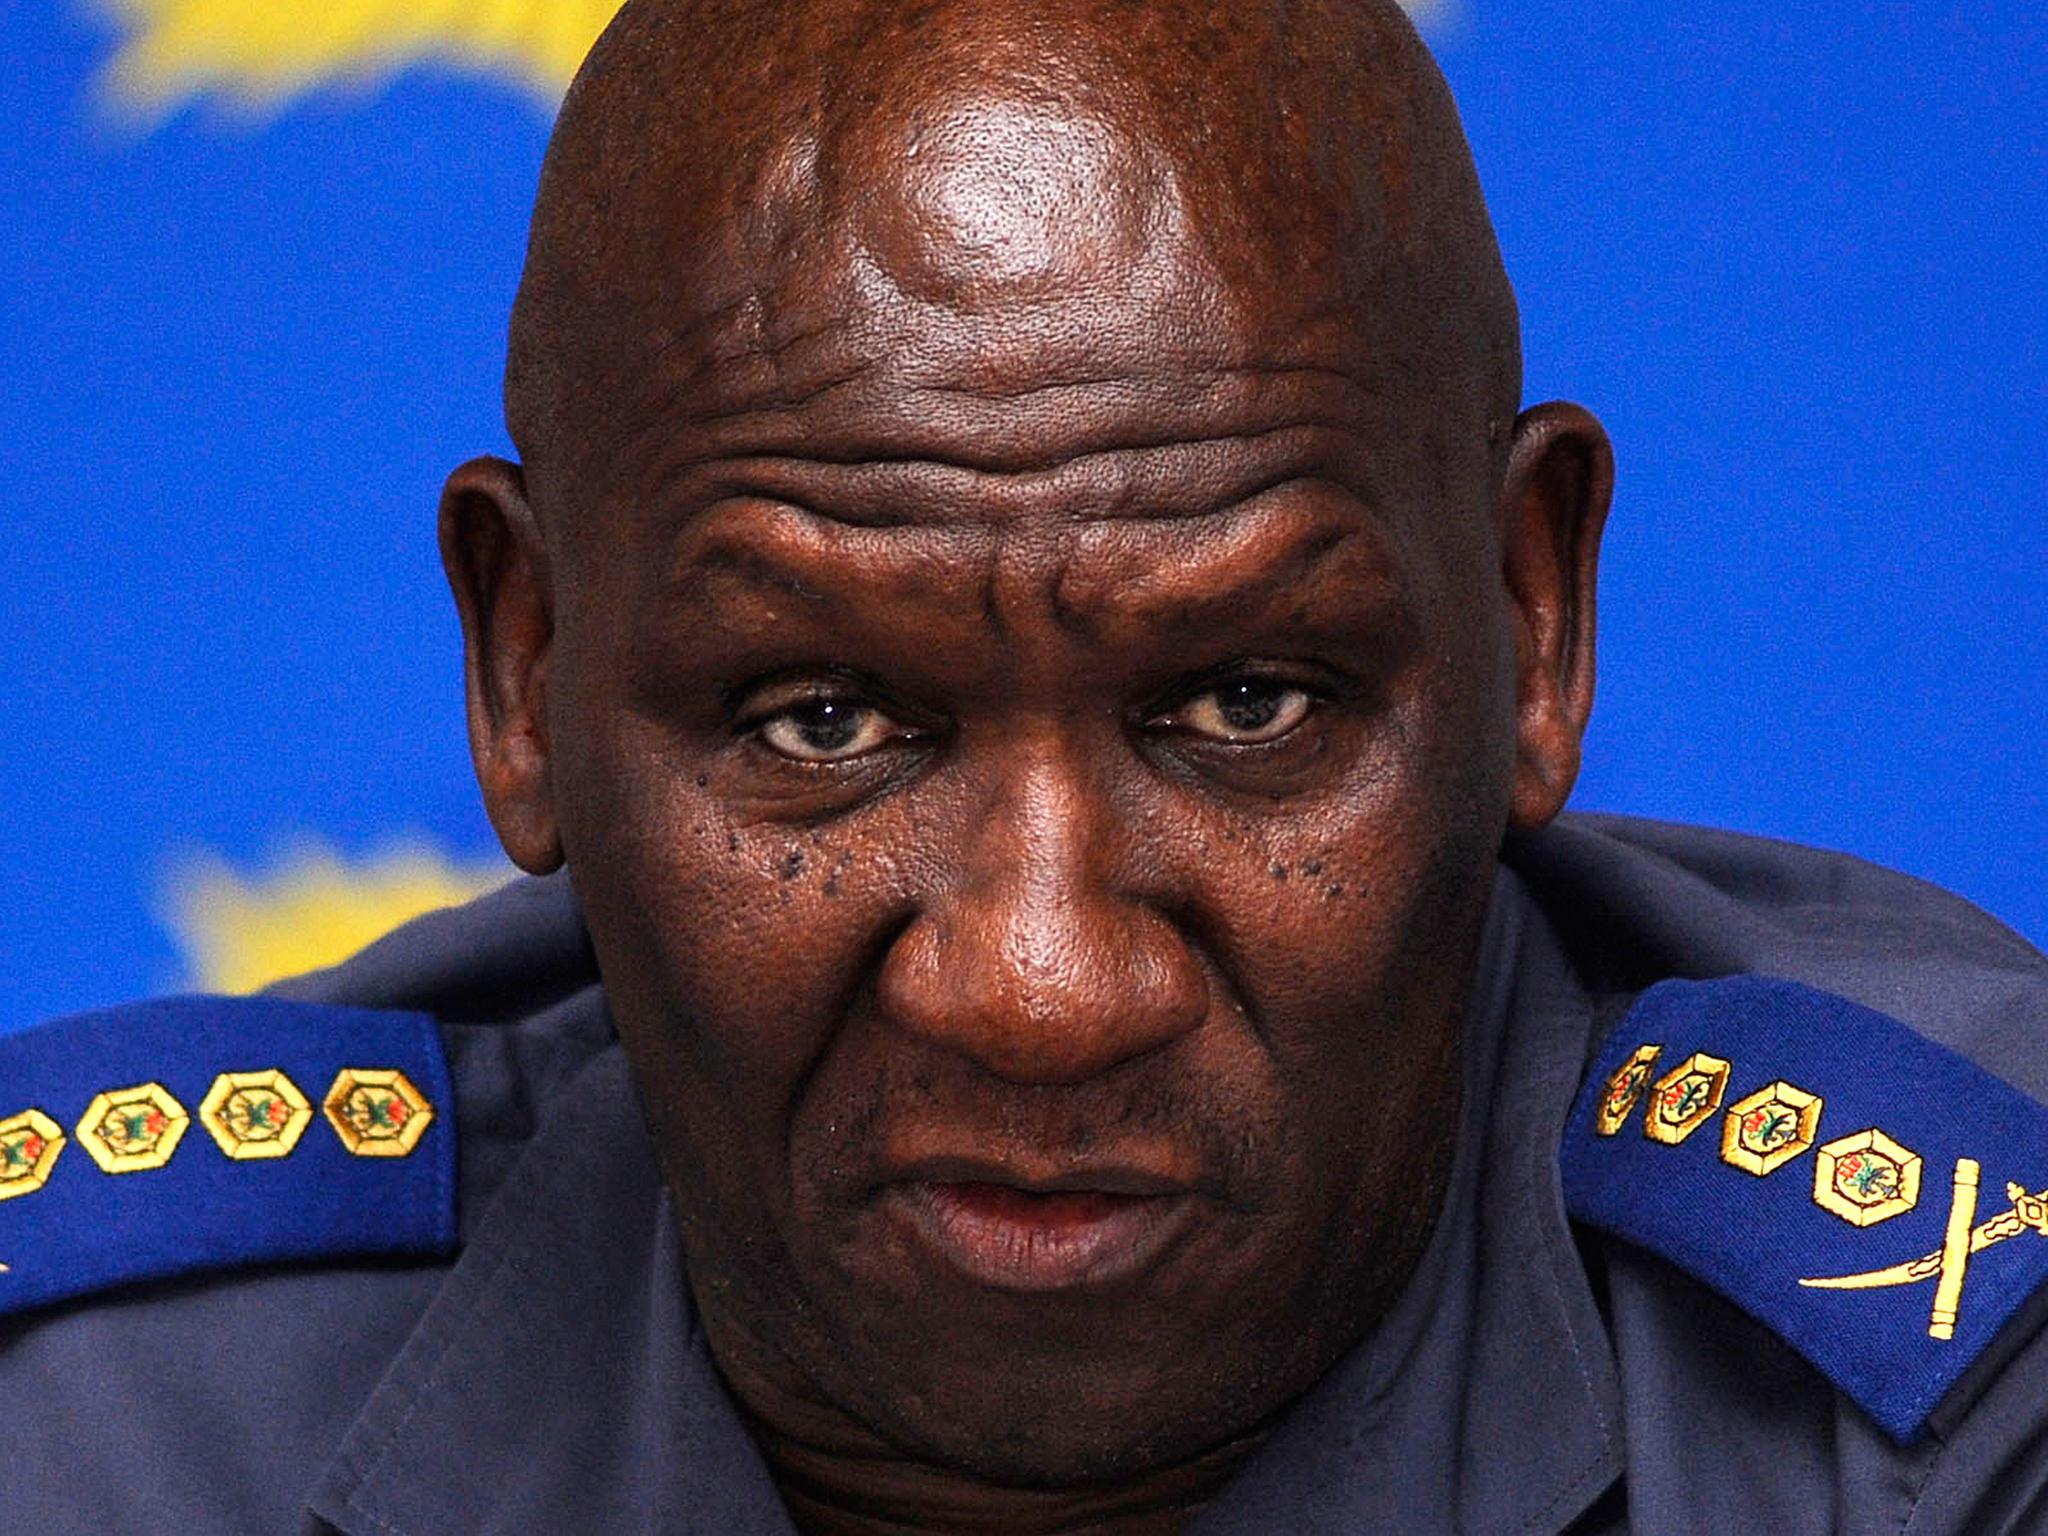 Zuma-appointed Bheki Cele introduced a ‘shoot-to-kill’ policy when police commissioner